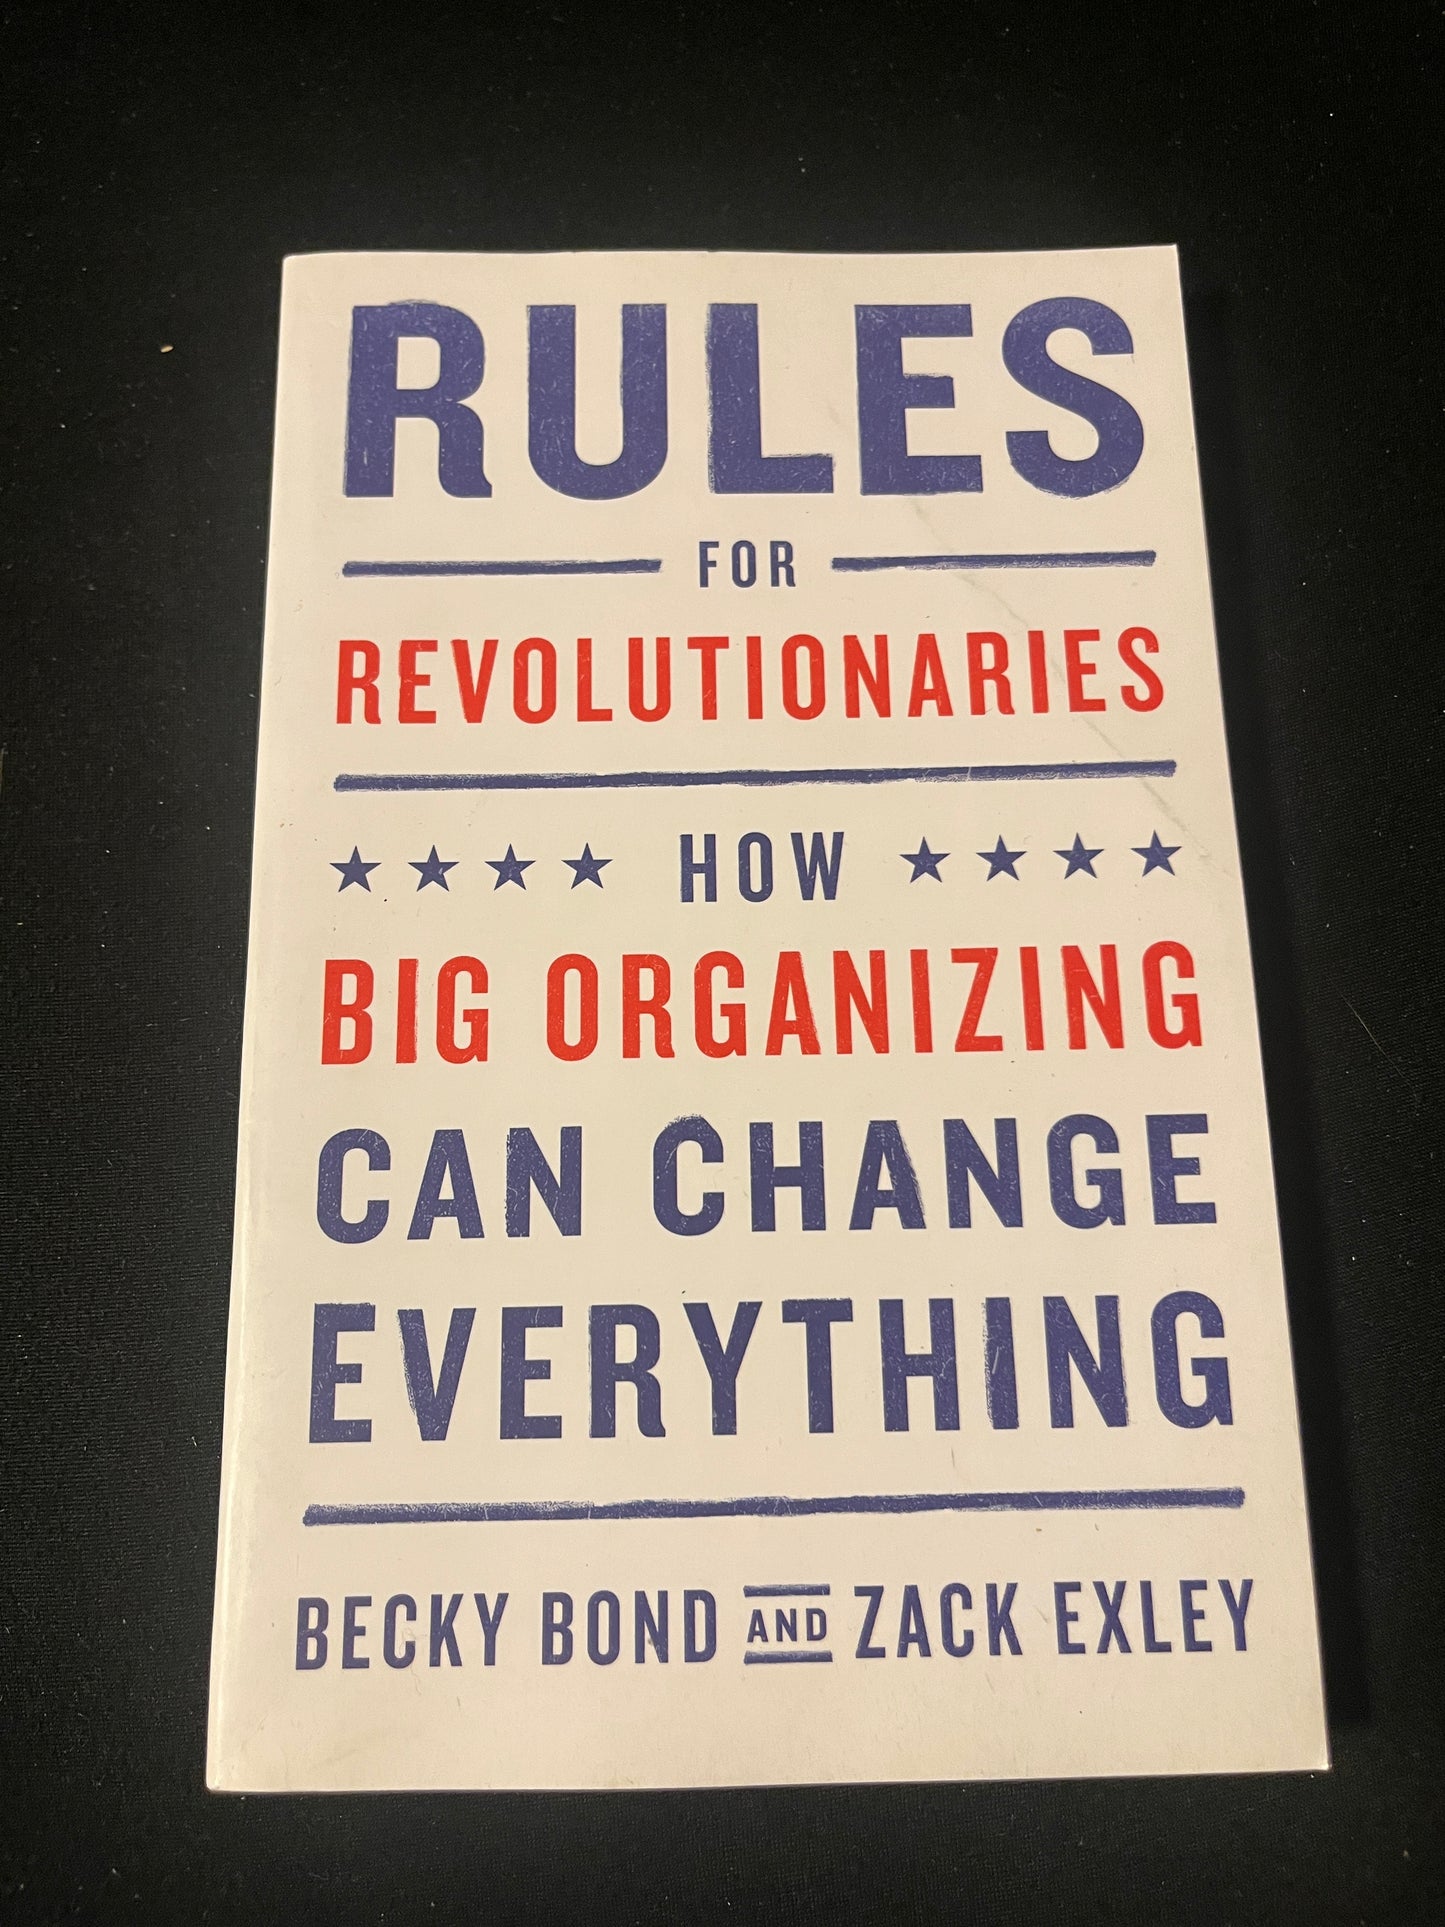 RULES FOR REVOLUTIONARIES: HOW BIG ORGANIZING CAN CHANGE EVERYTHING by Becky Bond and Zack Exley